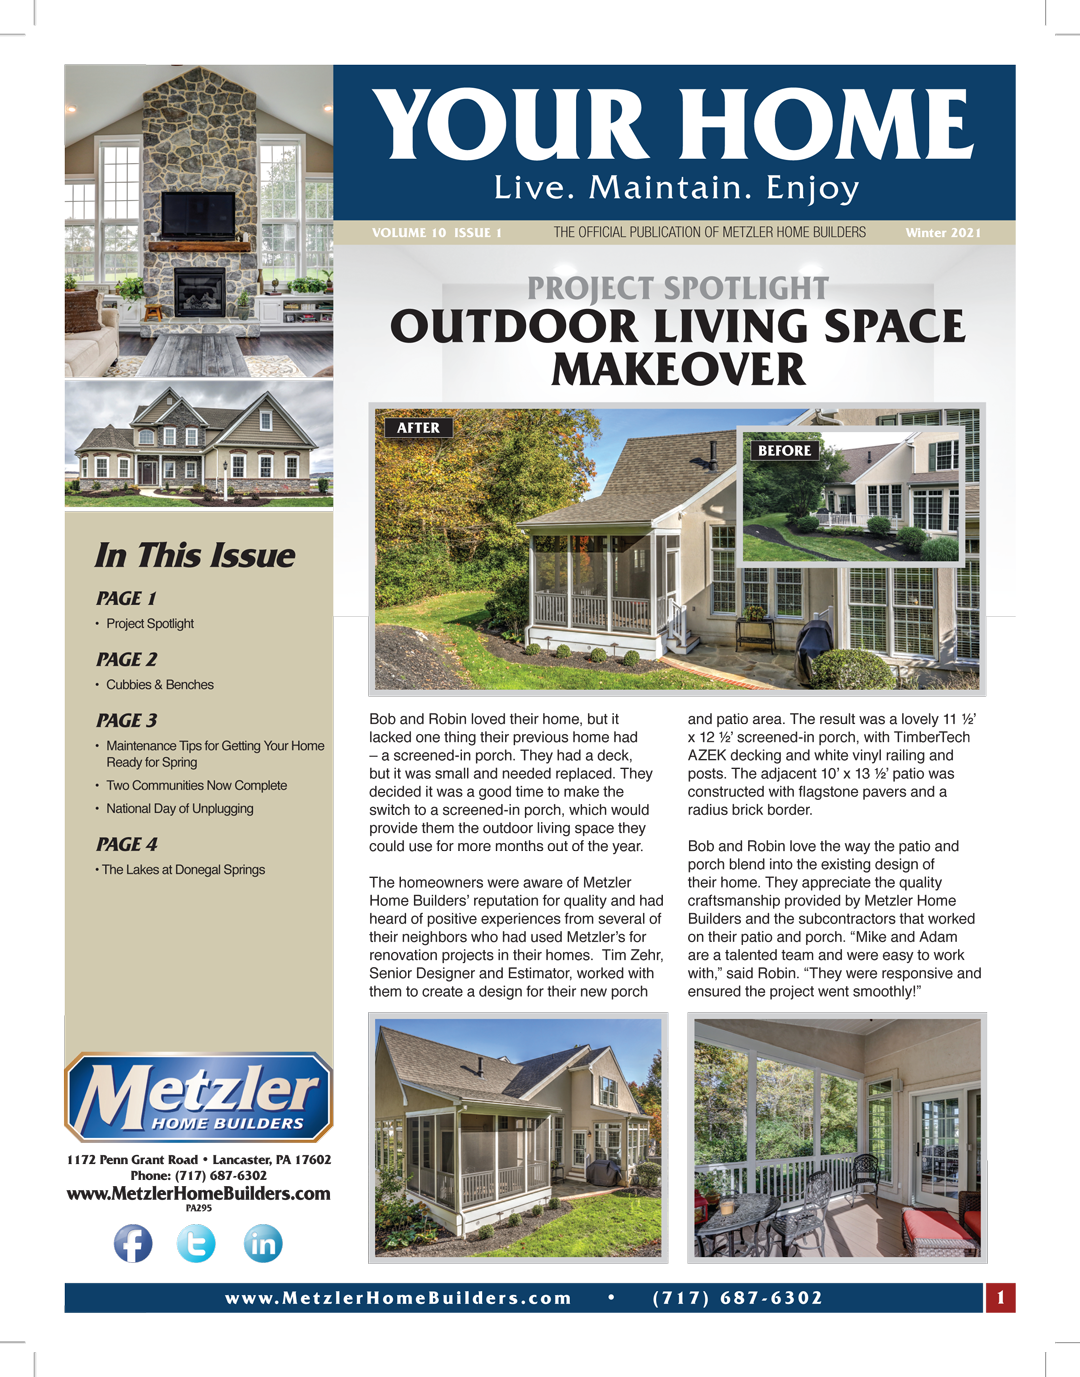 Metzler 'Your Home' Newsletter PDF cover for Winter 2021